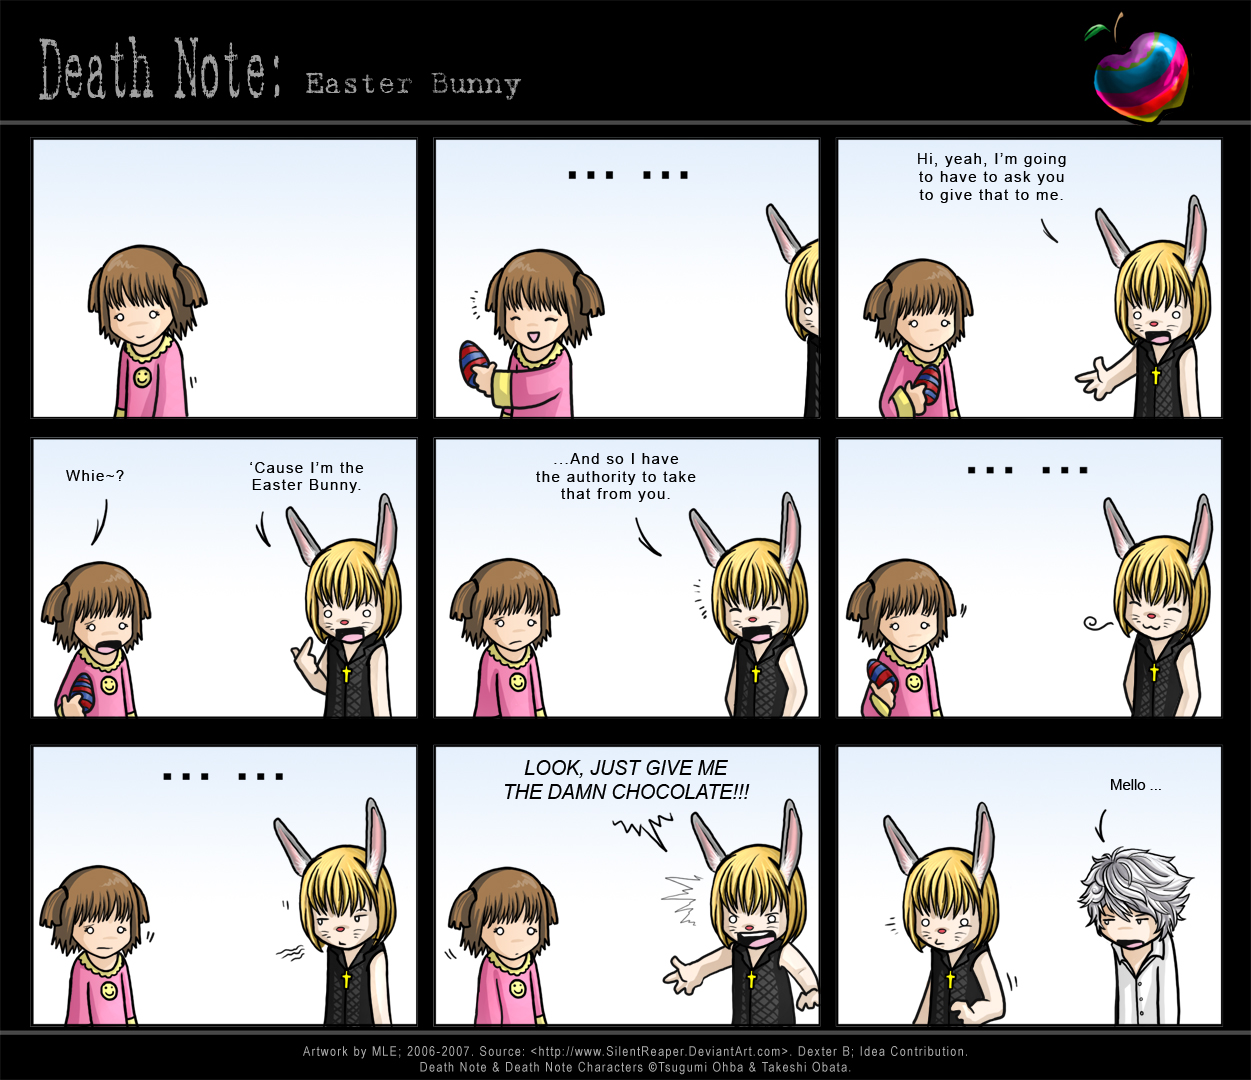 Death_Note__Easter_Bunny_by_SilentReaper.jpg